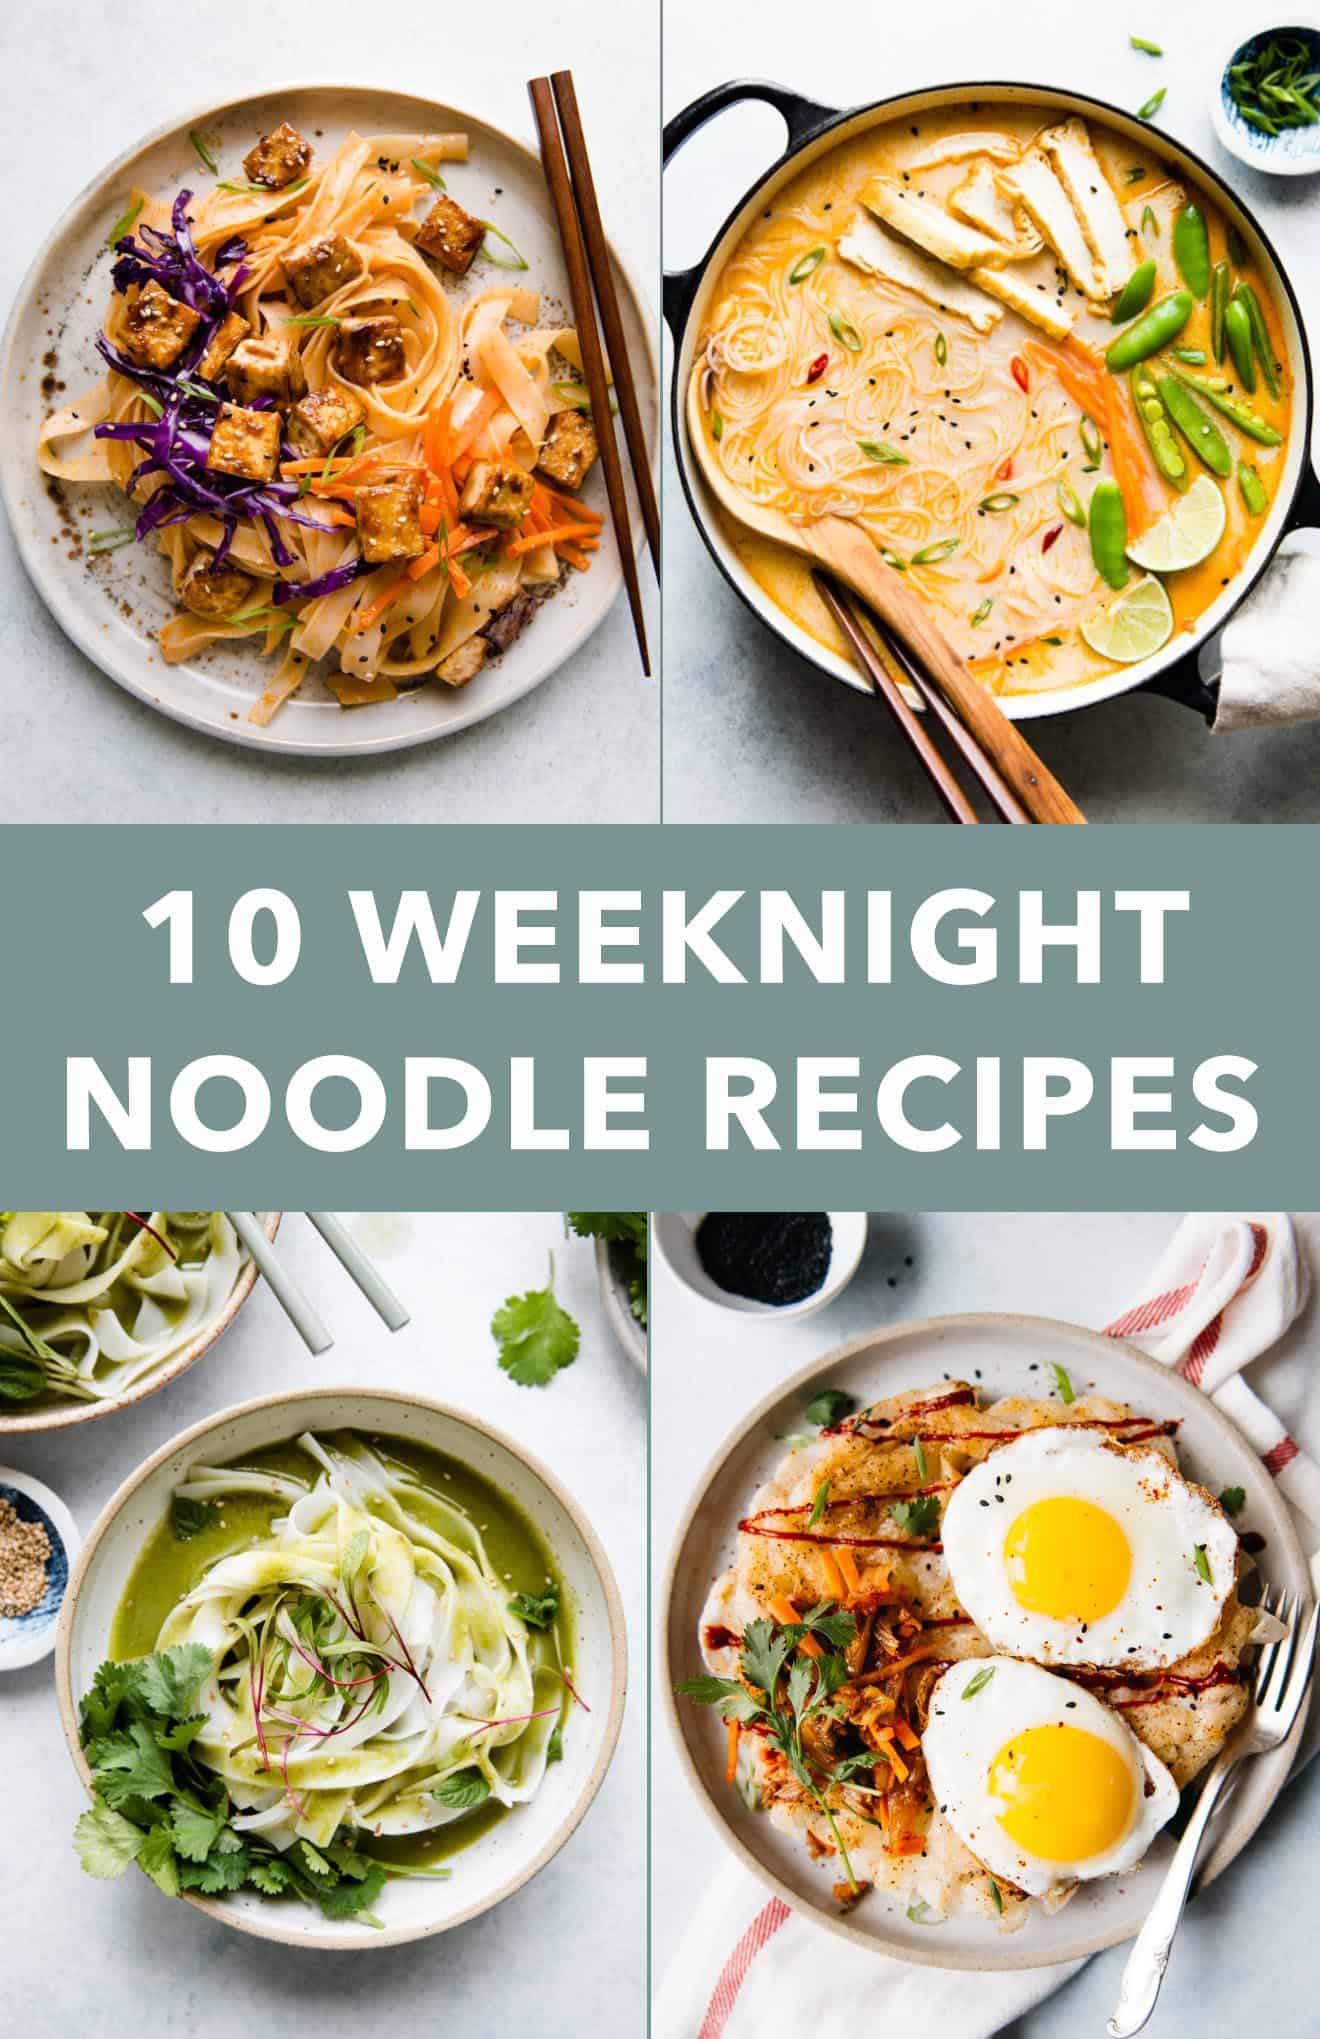 10 Weeknight Noodle Recipes